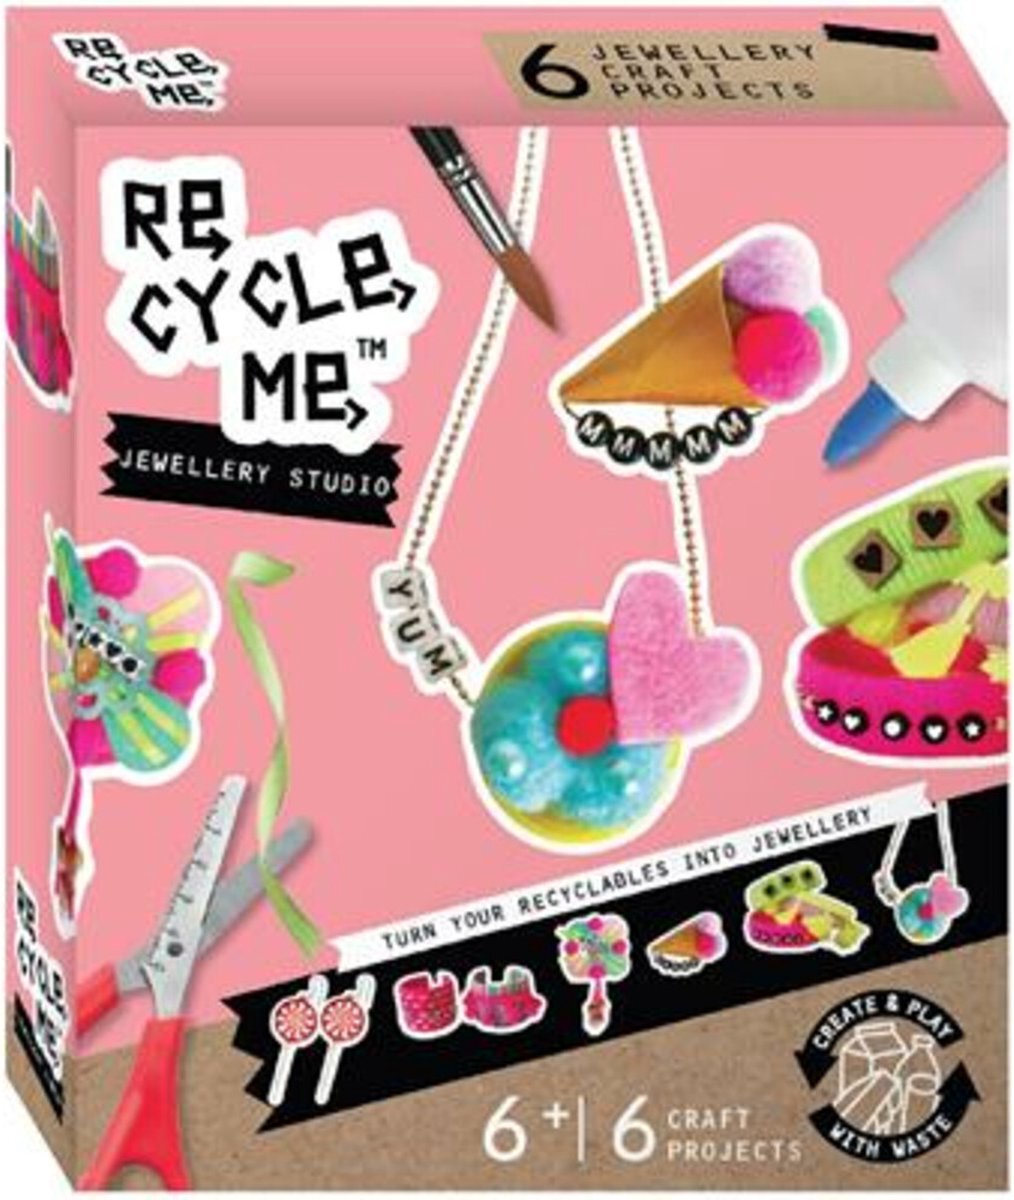 Re-Cycle-Me Re-Cycle-Me Jewellery Studio Knutselset